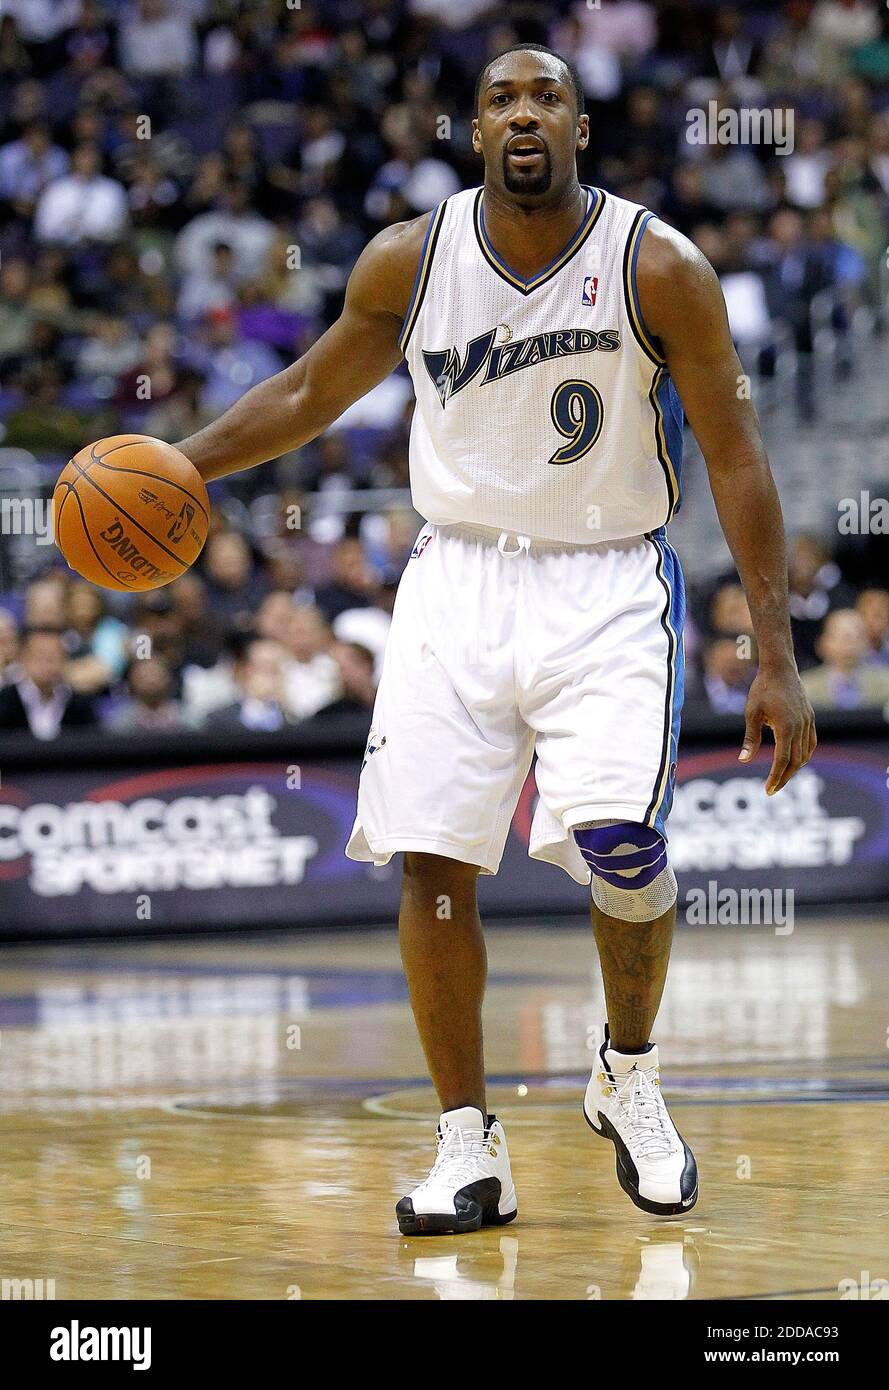 Washington Wizards Gilbert Arenas warms-up prior to the Wizards game  against the San Antonio Spurs at the Verizon Center in Washington on  January 2, 2010. Arenas allegedly drew a gun on teammate